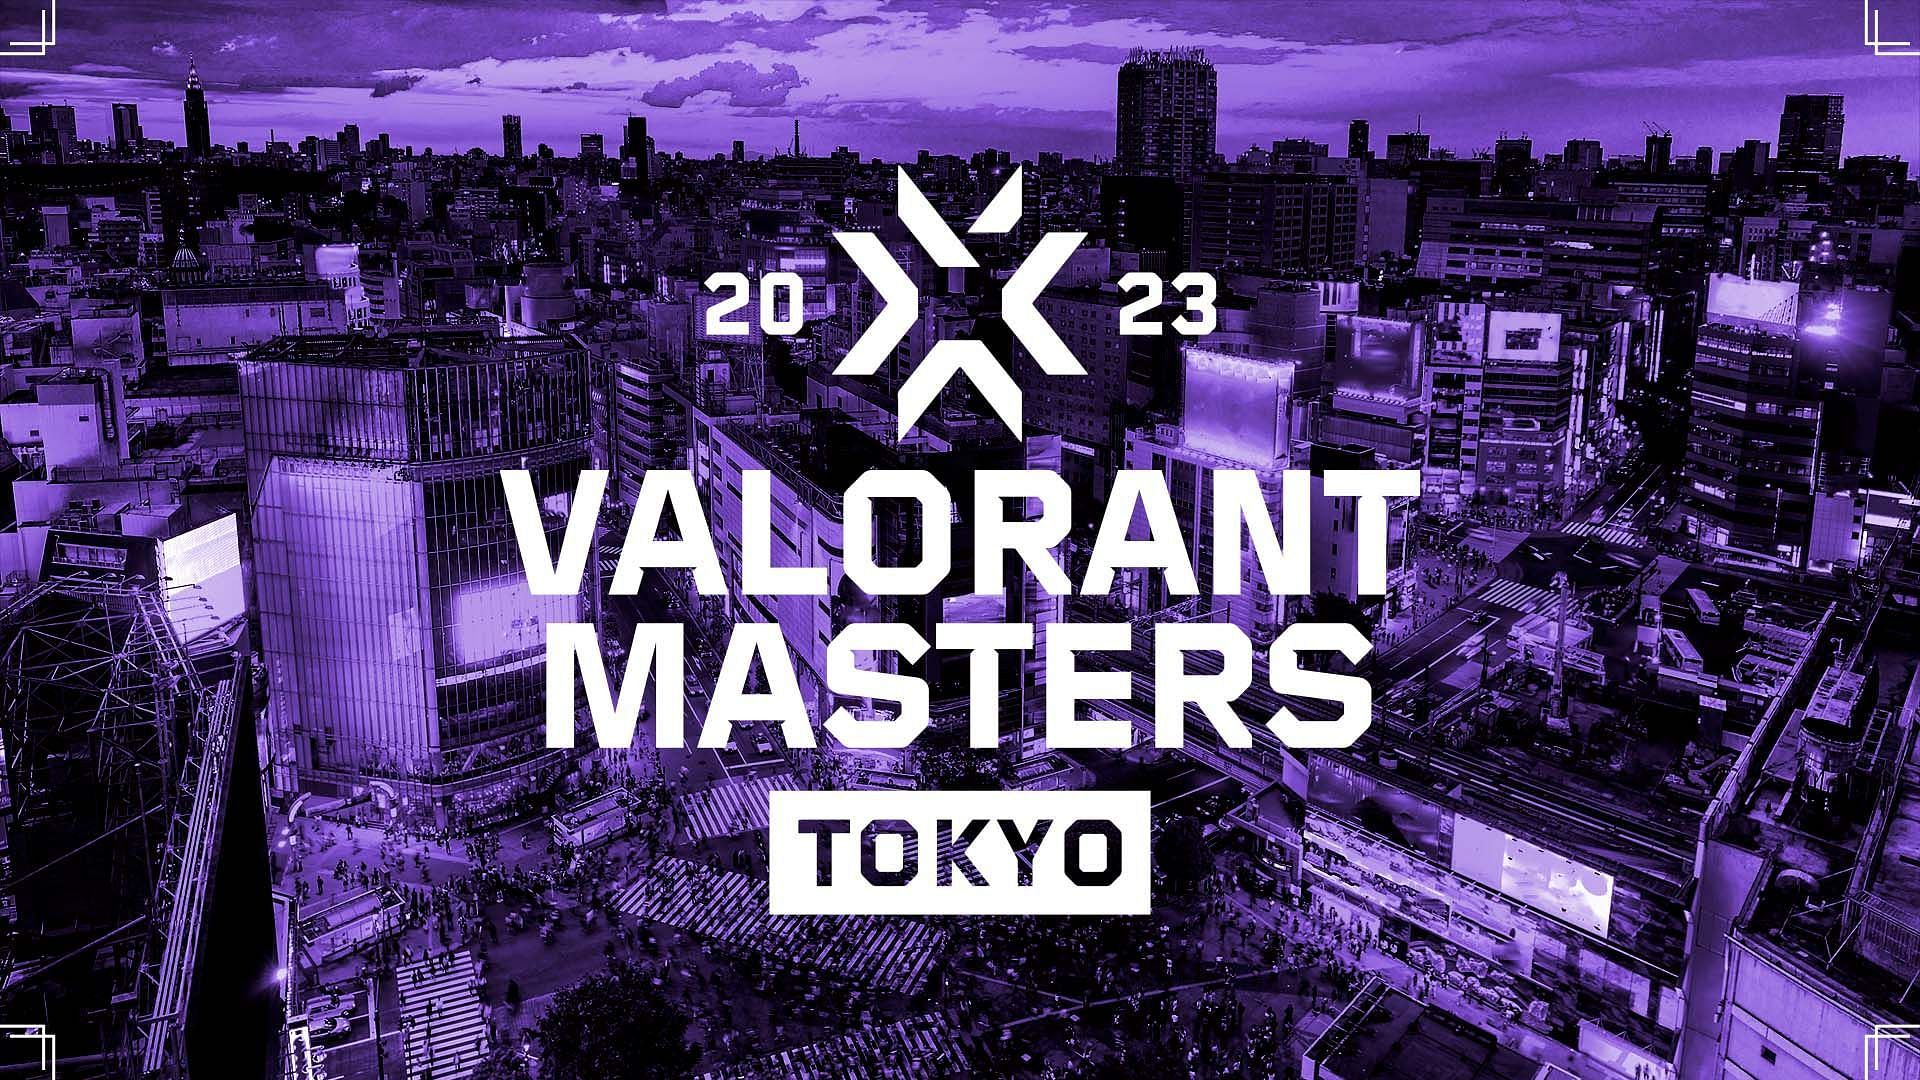 VCT Masters Tokyo schedule and venue (Image via Riot Games)